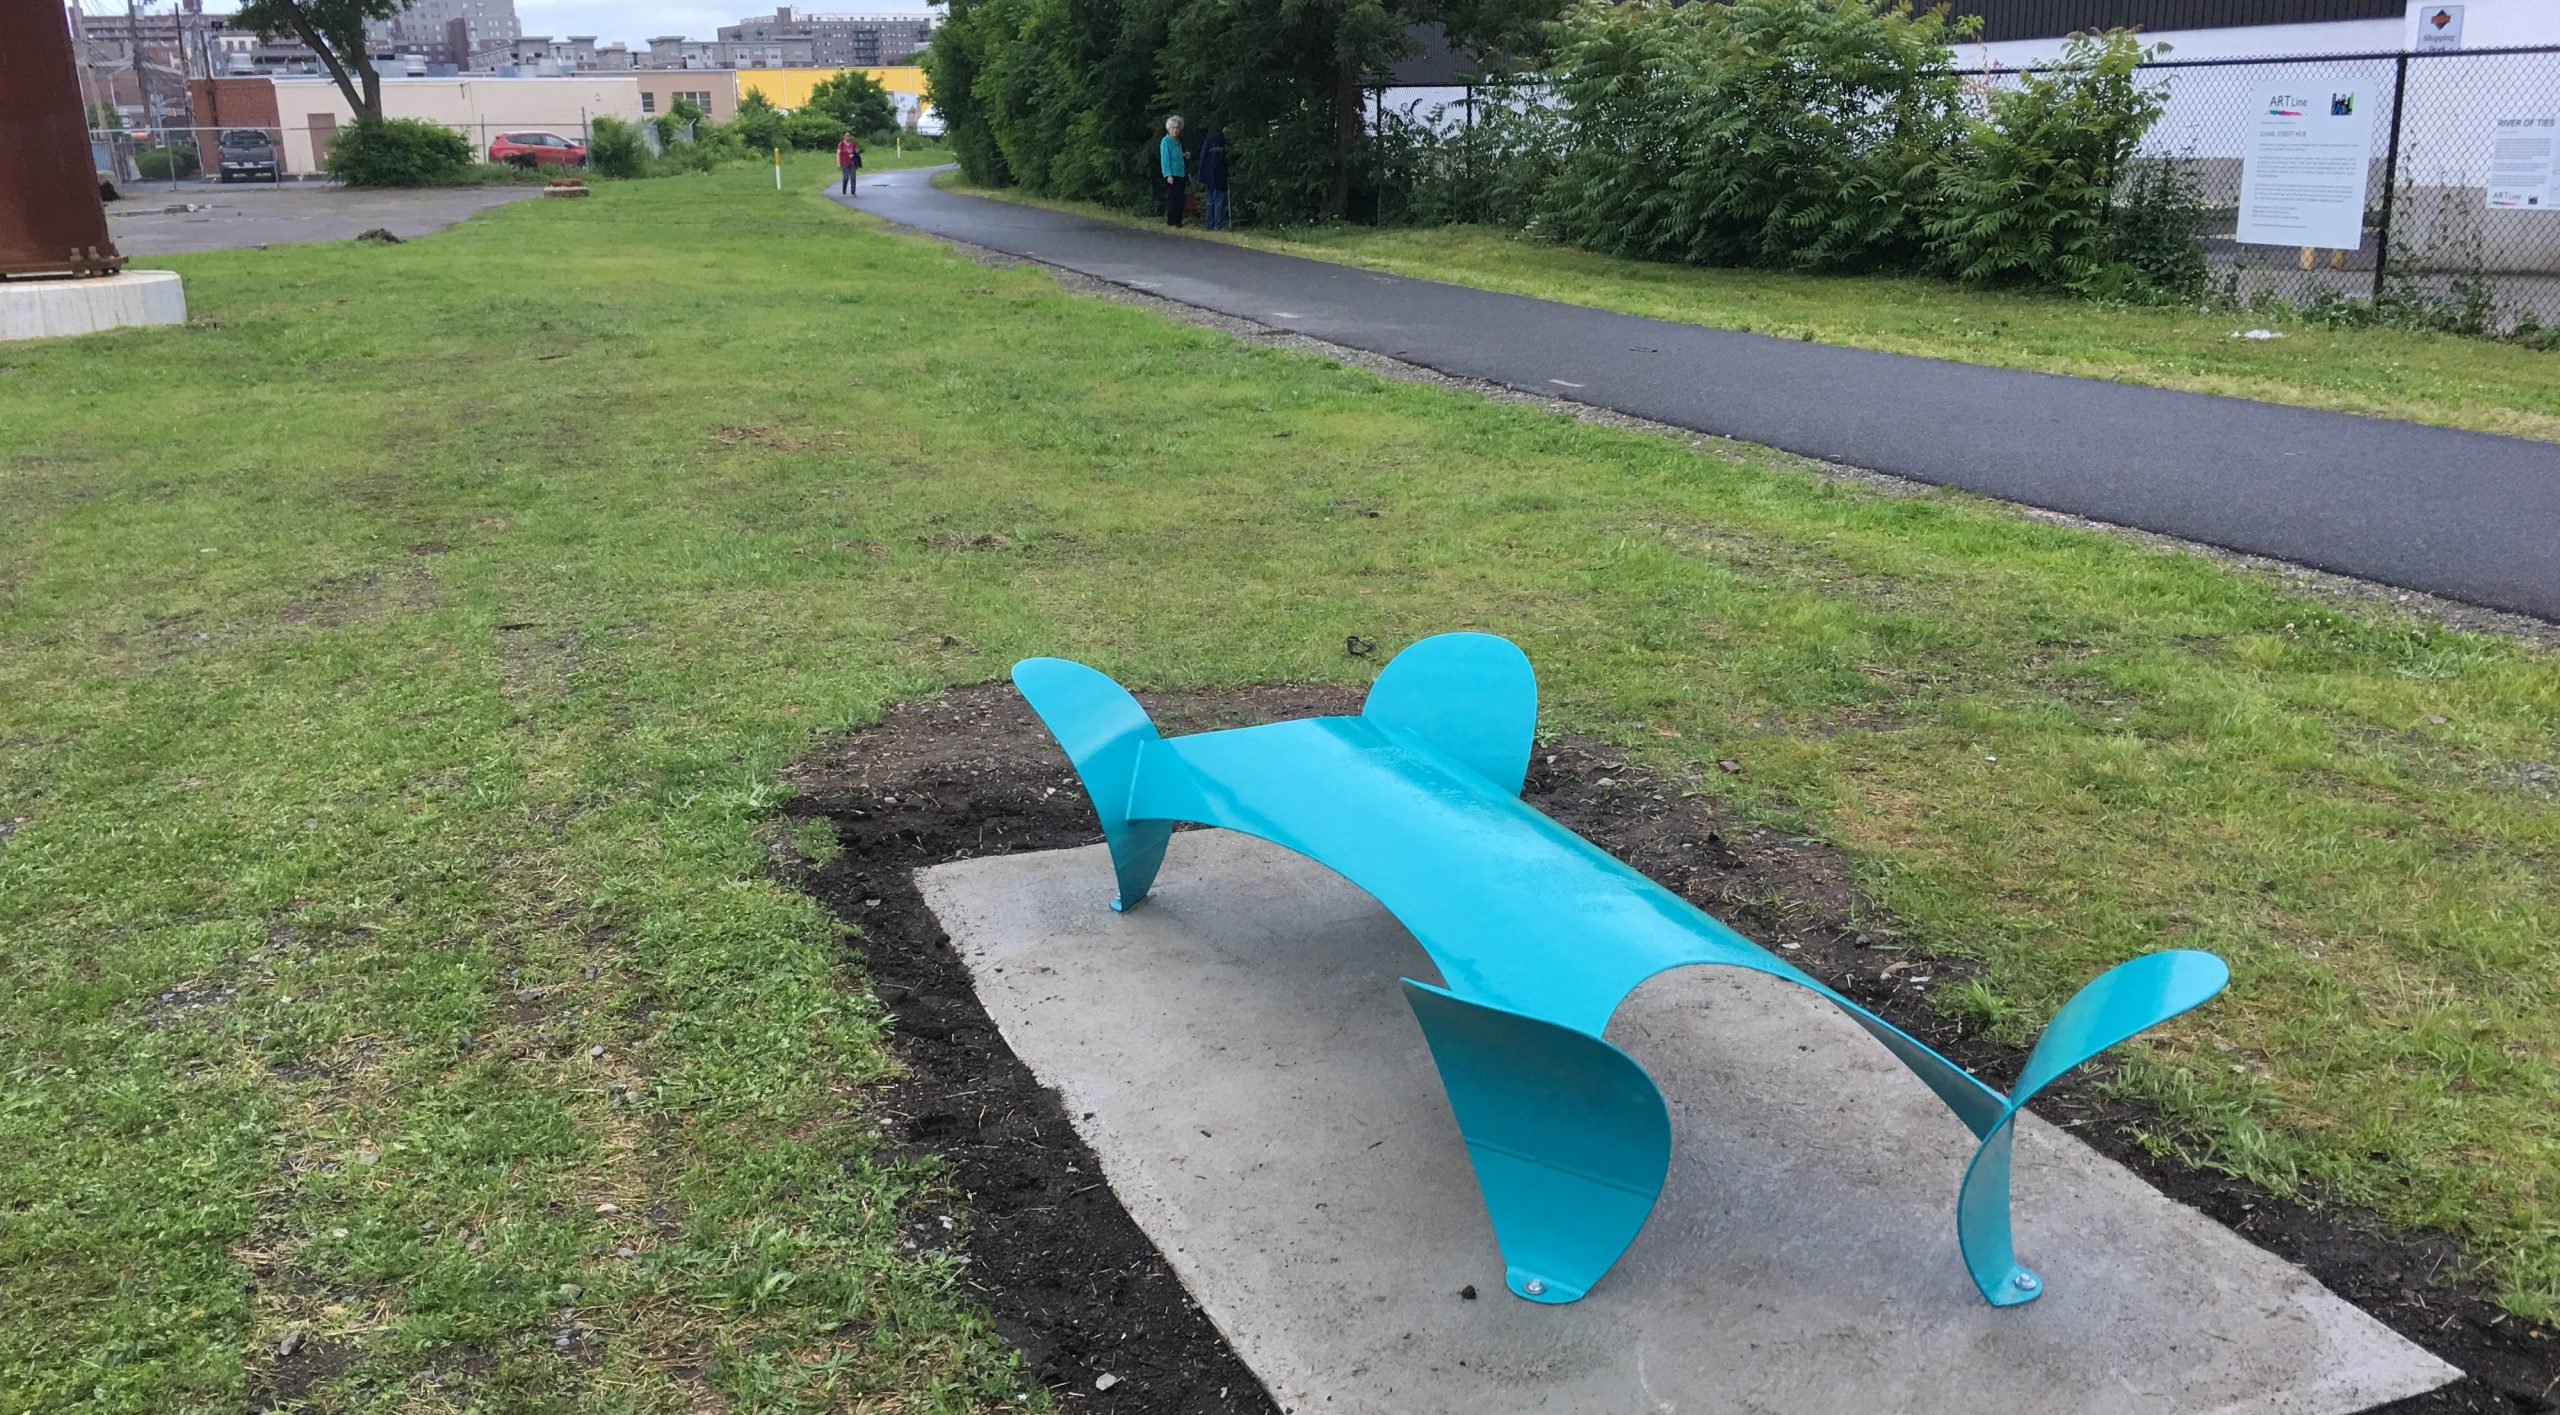 Multi-use trail seating sculptures